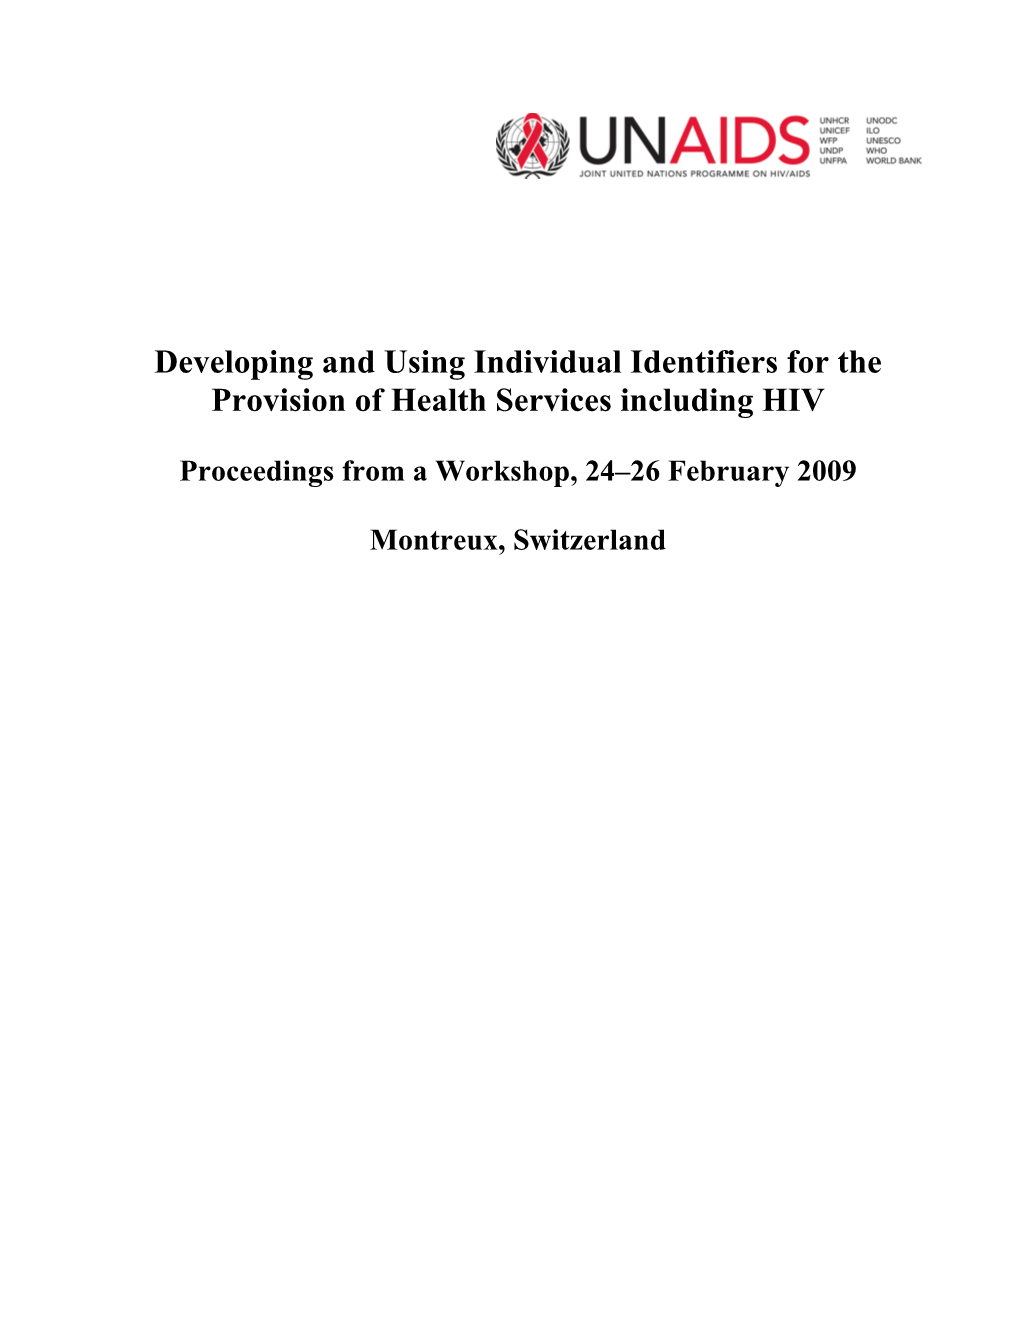 Developing and Using Individual Identifiers for the Provision of Health Services Including HIV